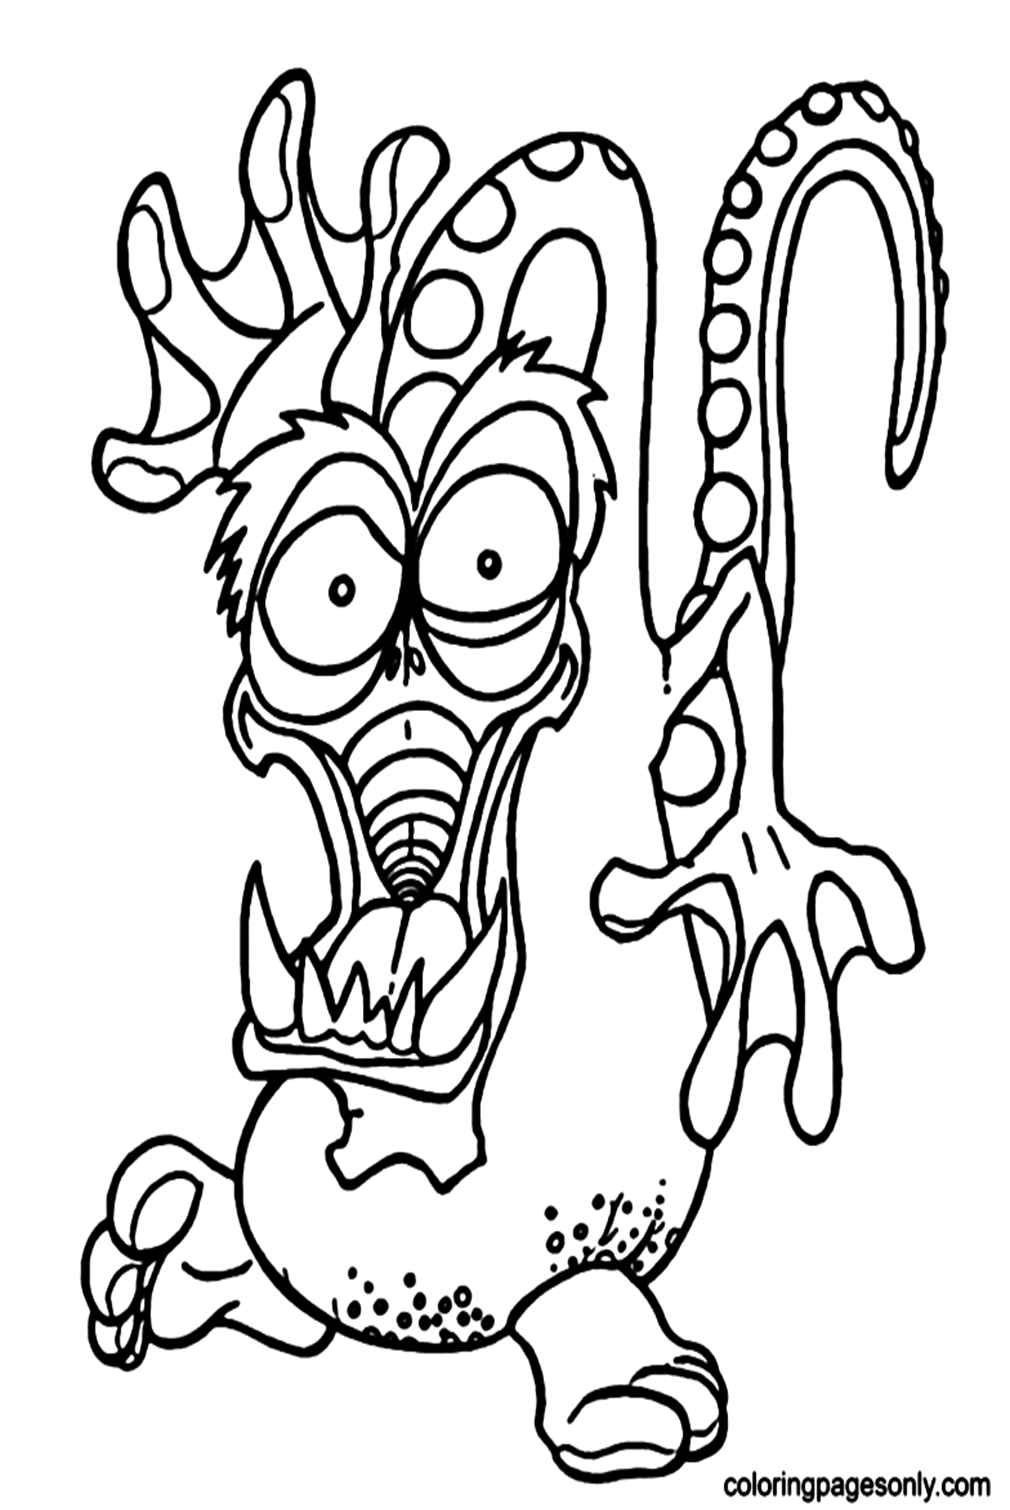 Monsters on Halloween Printable Coloring Page